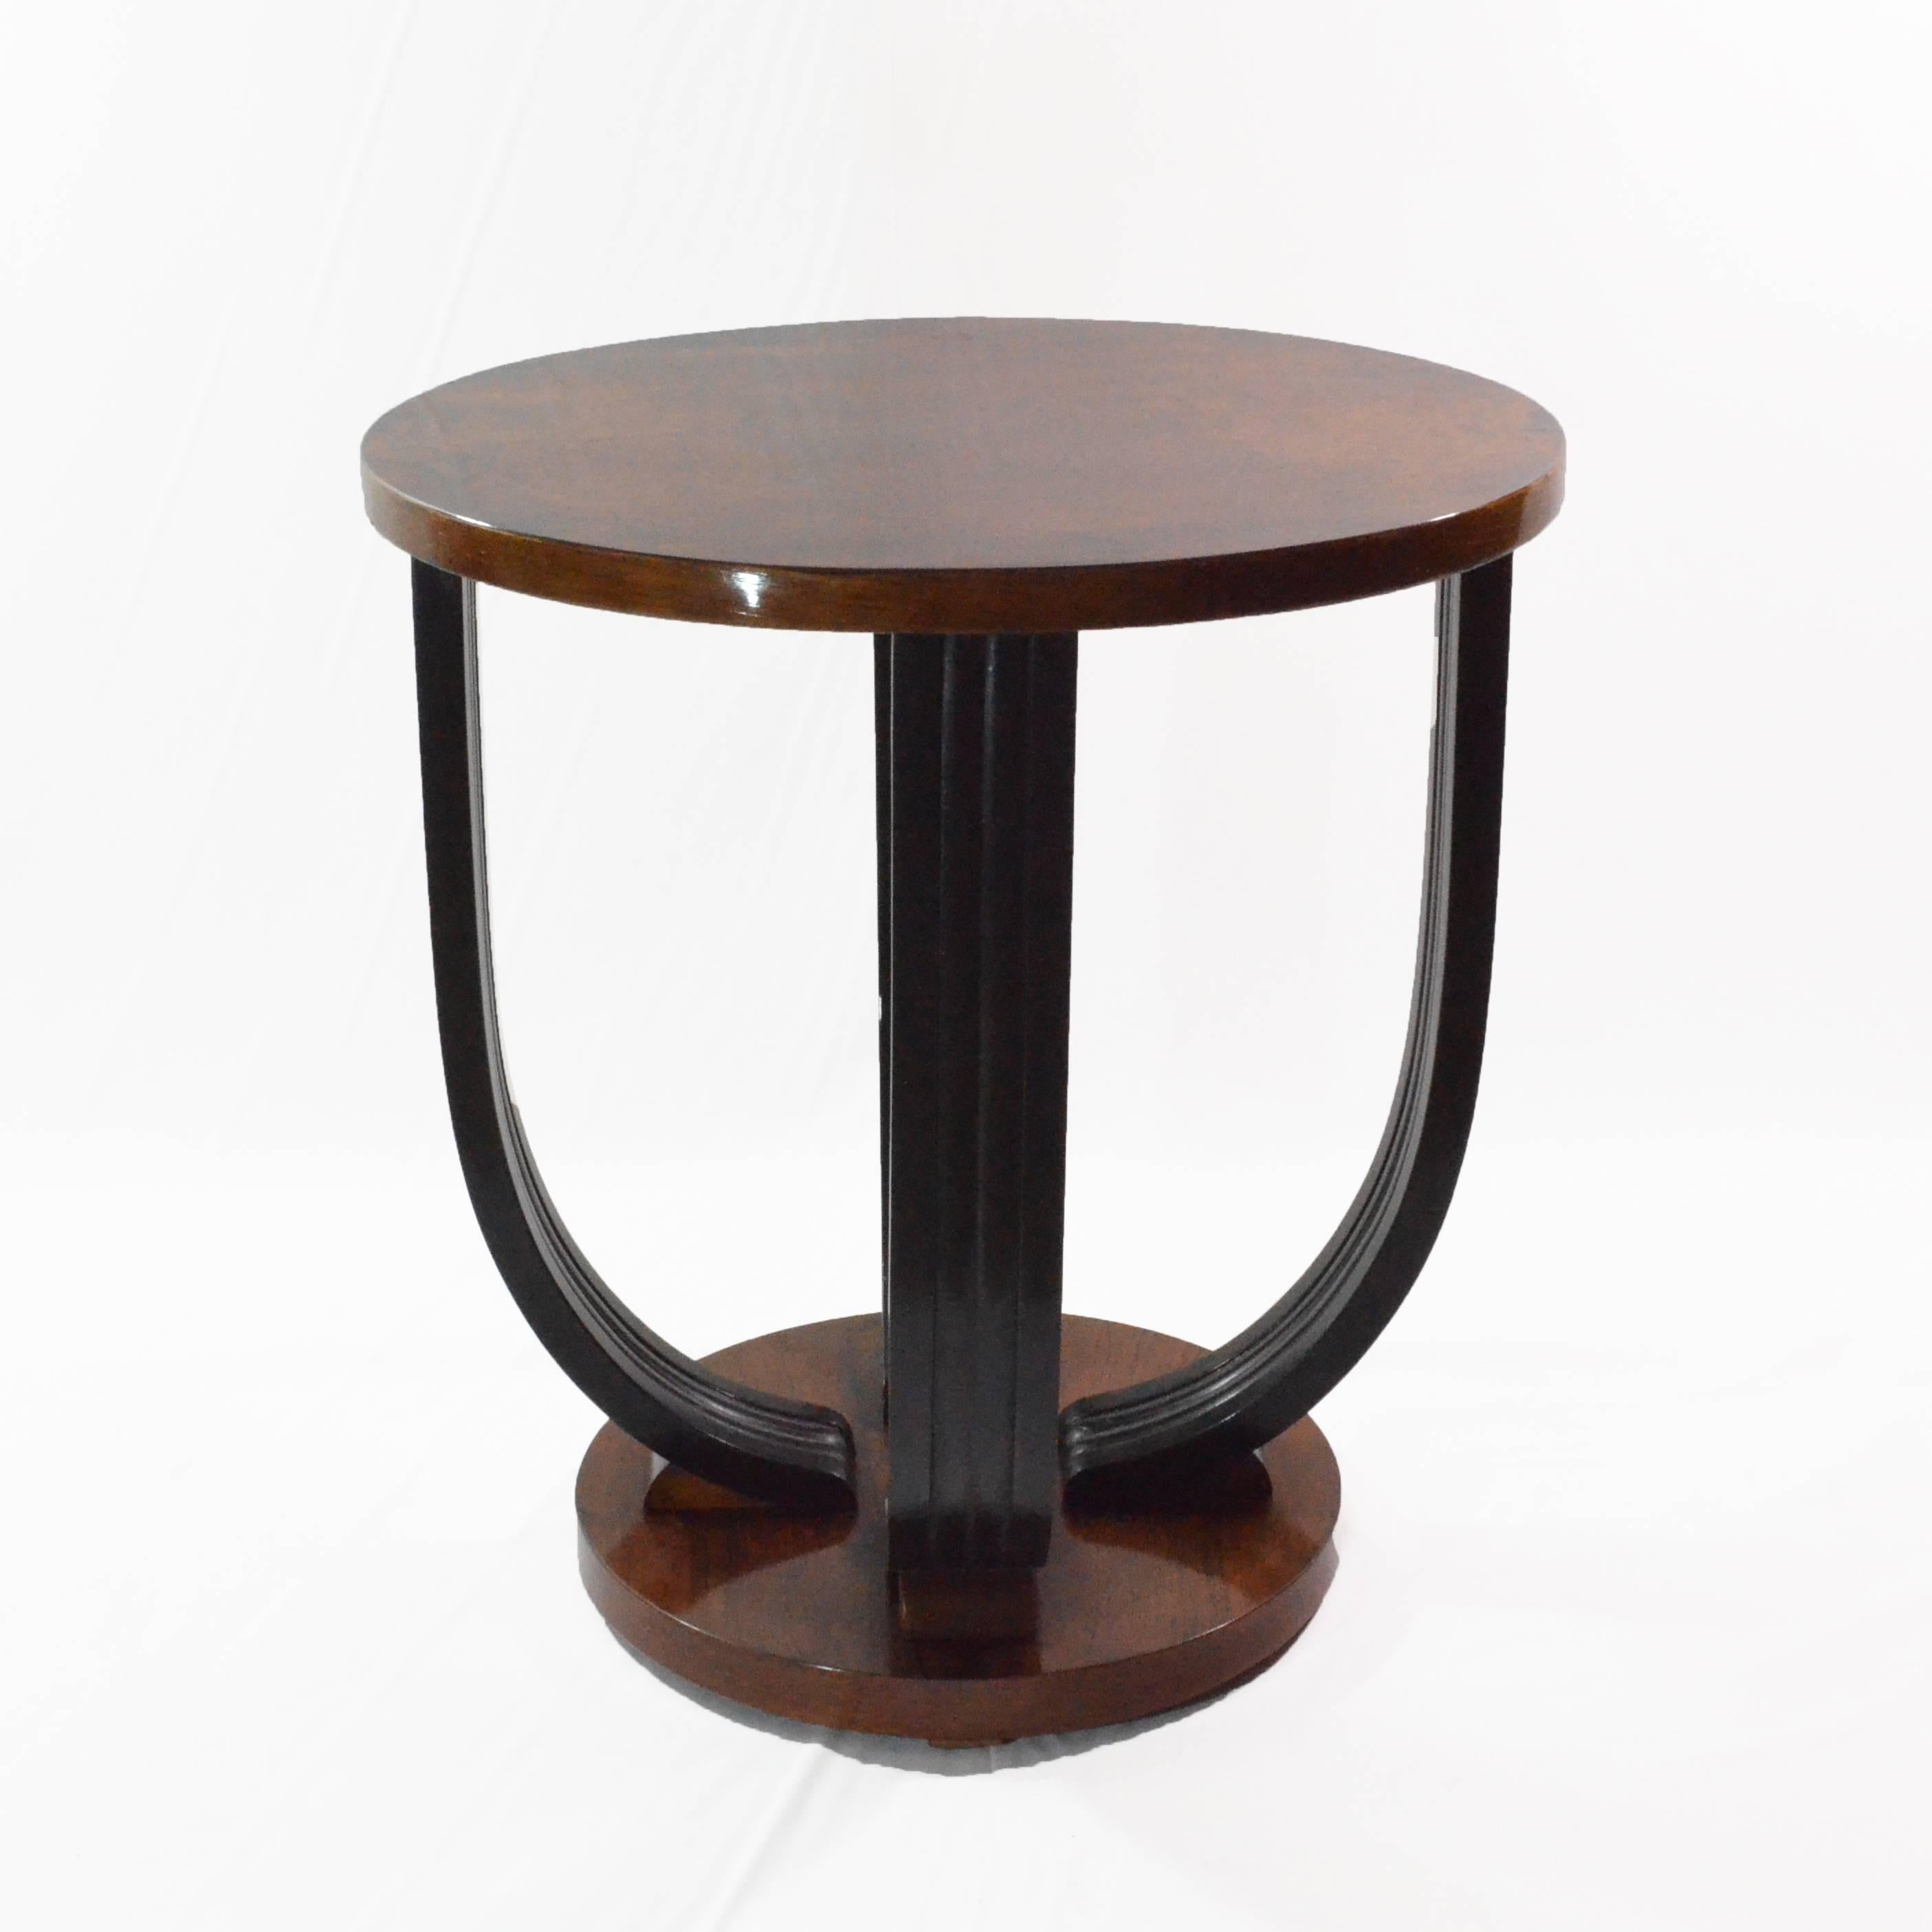 Small and ductile gueridon table from Art Deco period circa 1930 from France. It features two tiers, one of them is veneered and black ebonized legs with line and shape typical for the period. This gueridon suits not only living room as a sofa table